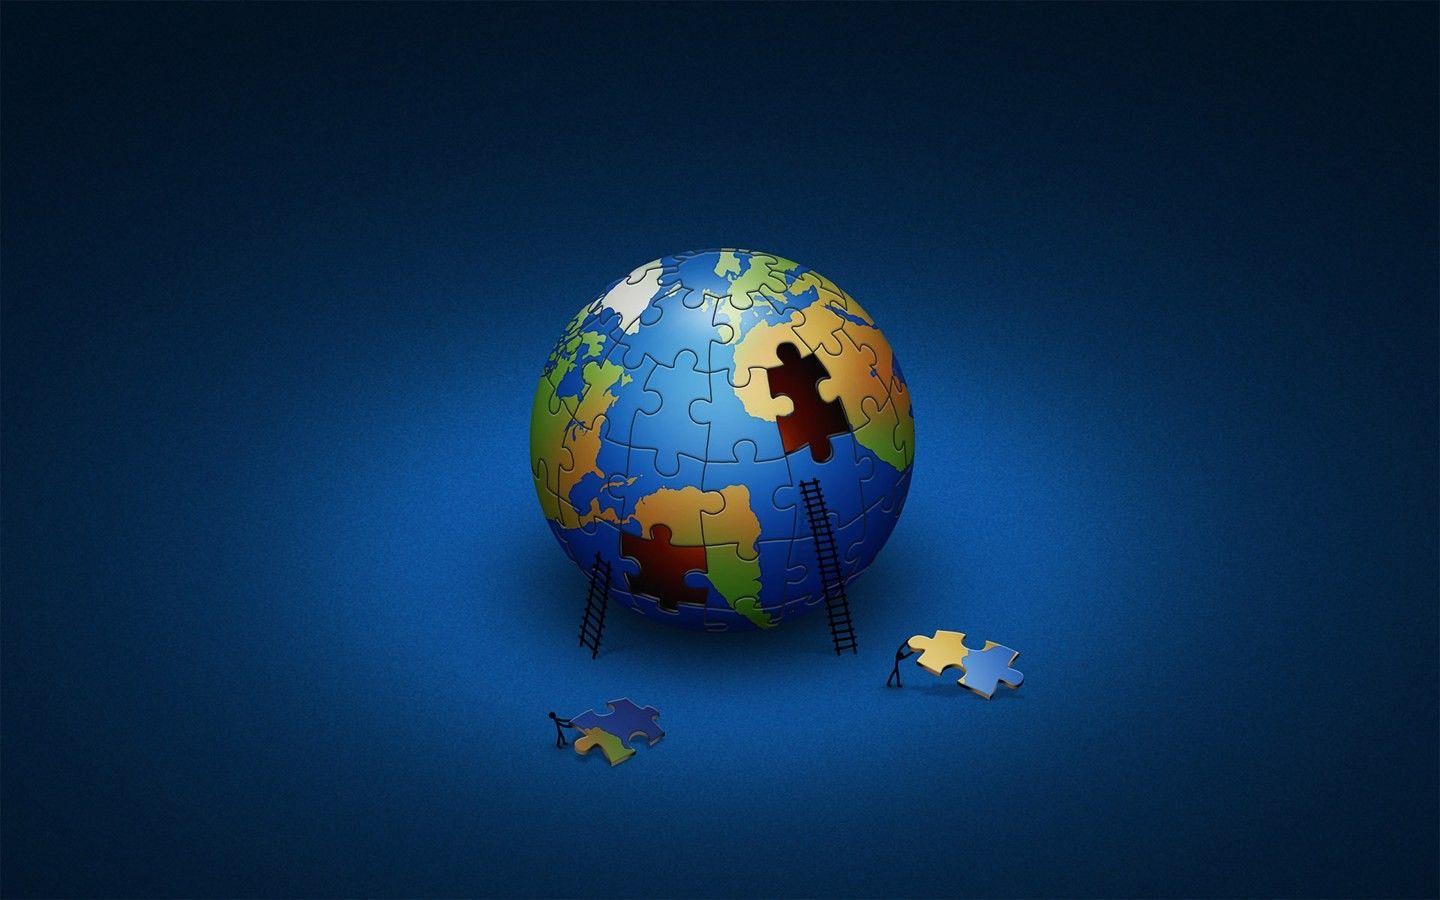 Download the World Is A Puzzle Wallpaper, World Is A Puzzle iPhone